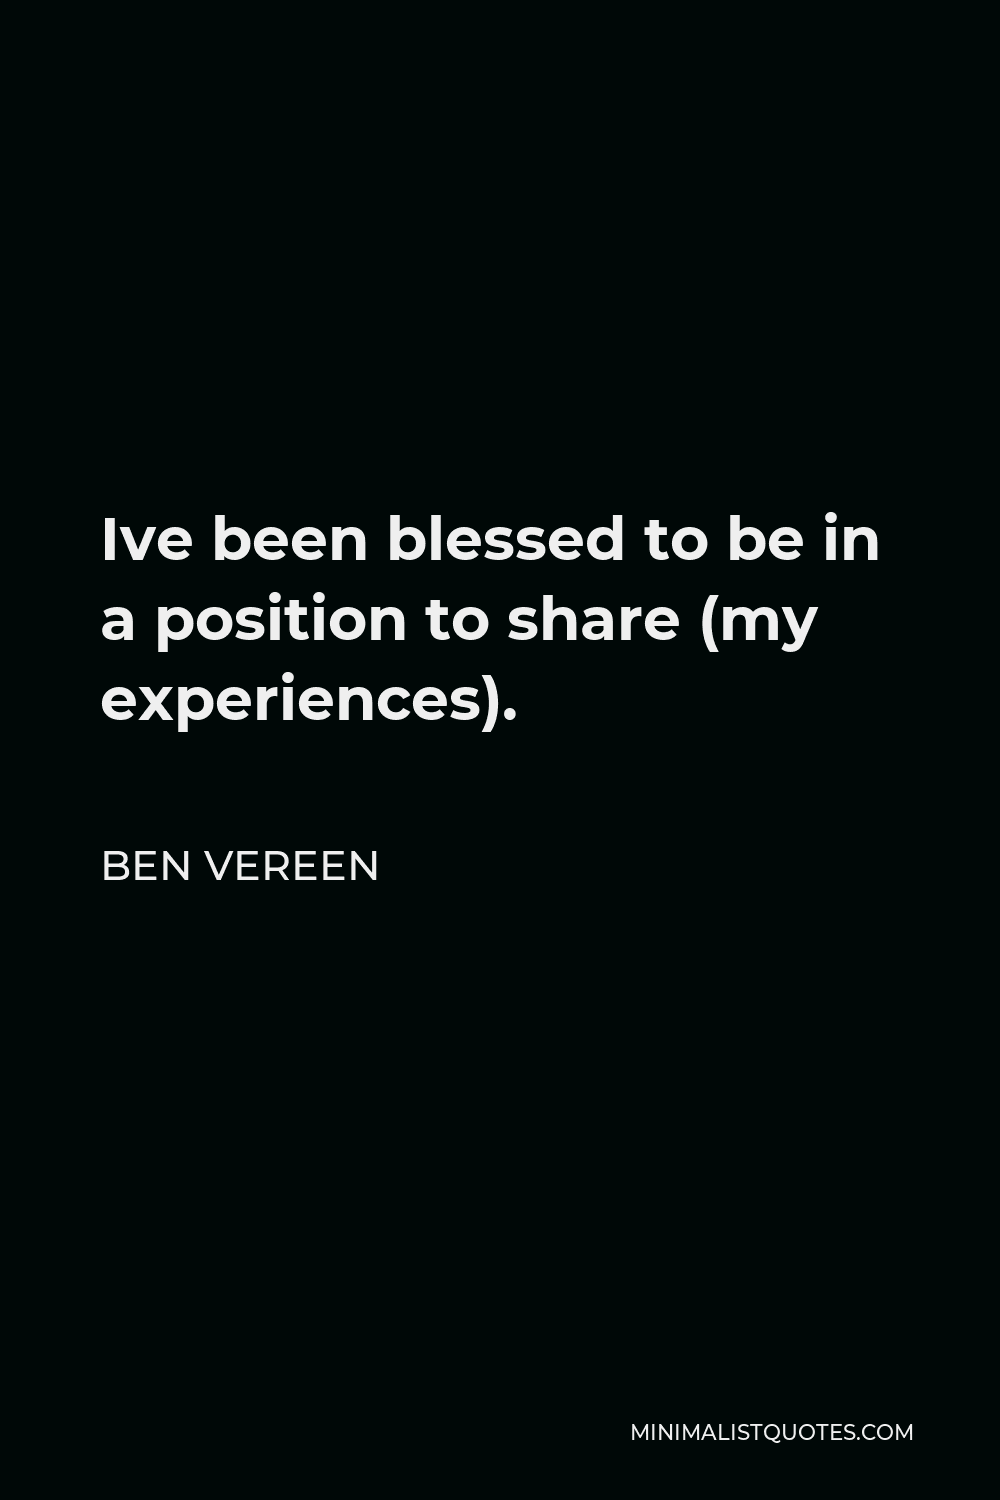 Ben Vereen Quote - Ive been blessed to be in a position to share (my experiences).